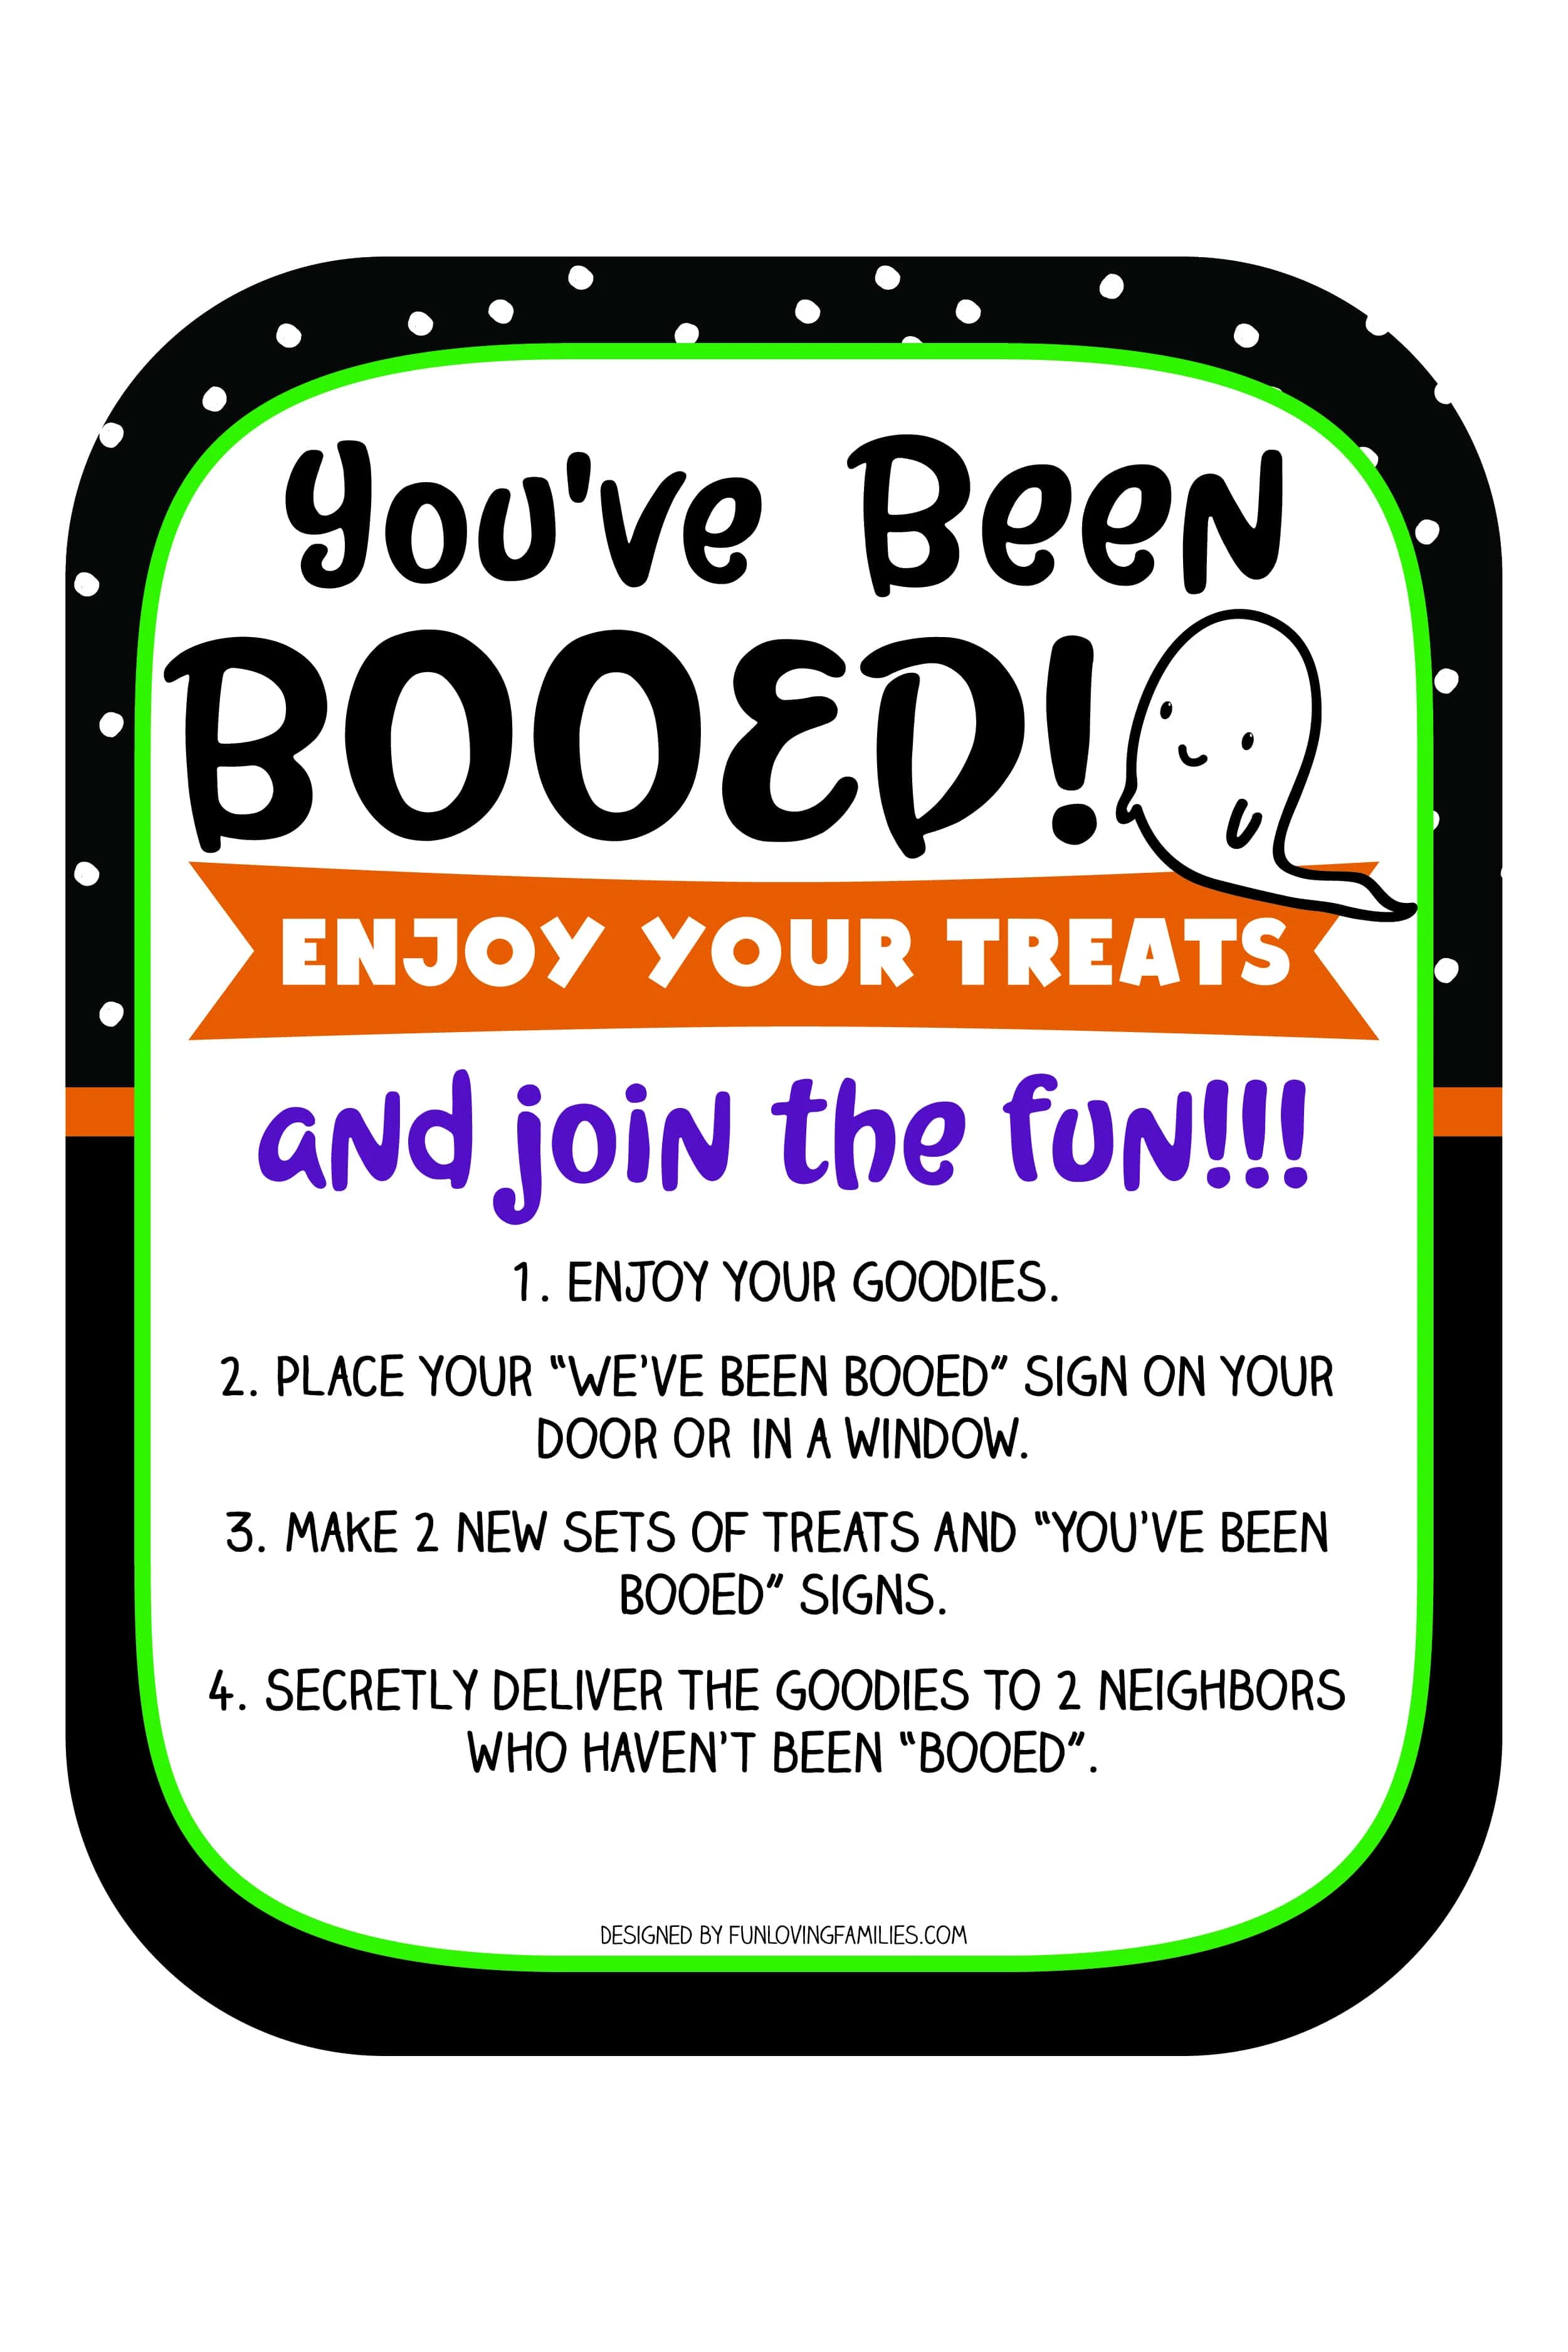 You've been Booed printable sign. Use this free printable to add to your Boo Basket so friends and neighbors can play along. #cute #halloweenprintables #booed #youvebeenbooed #ghost 